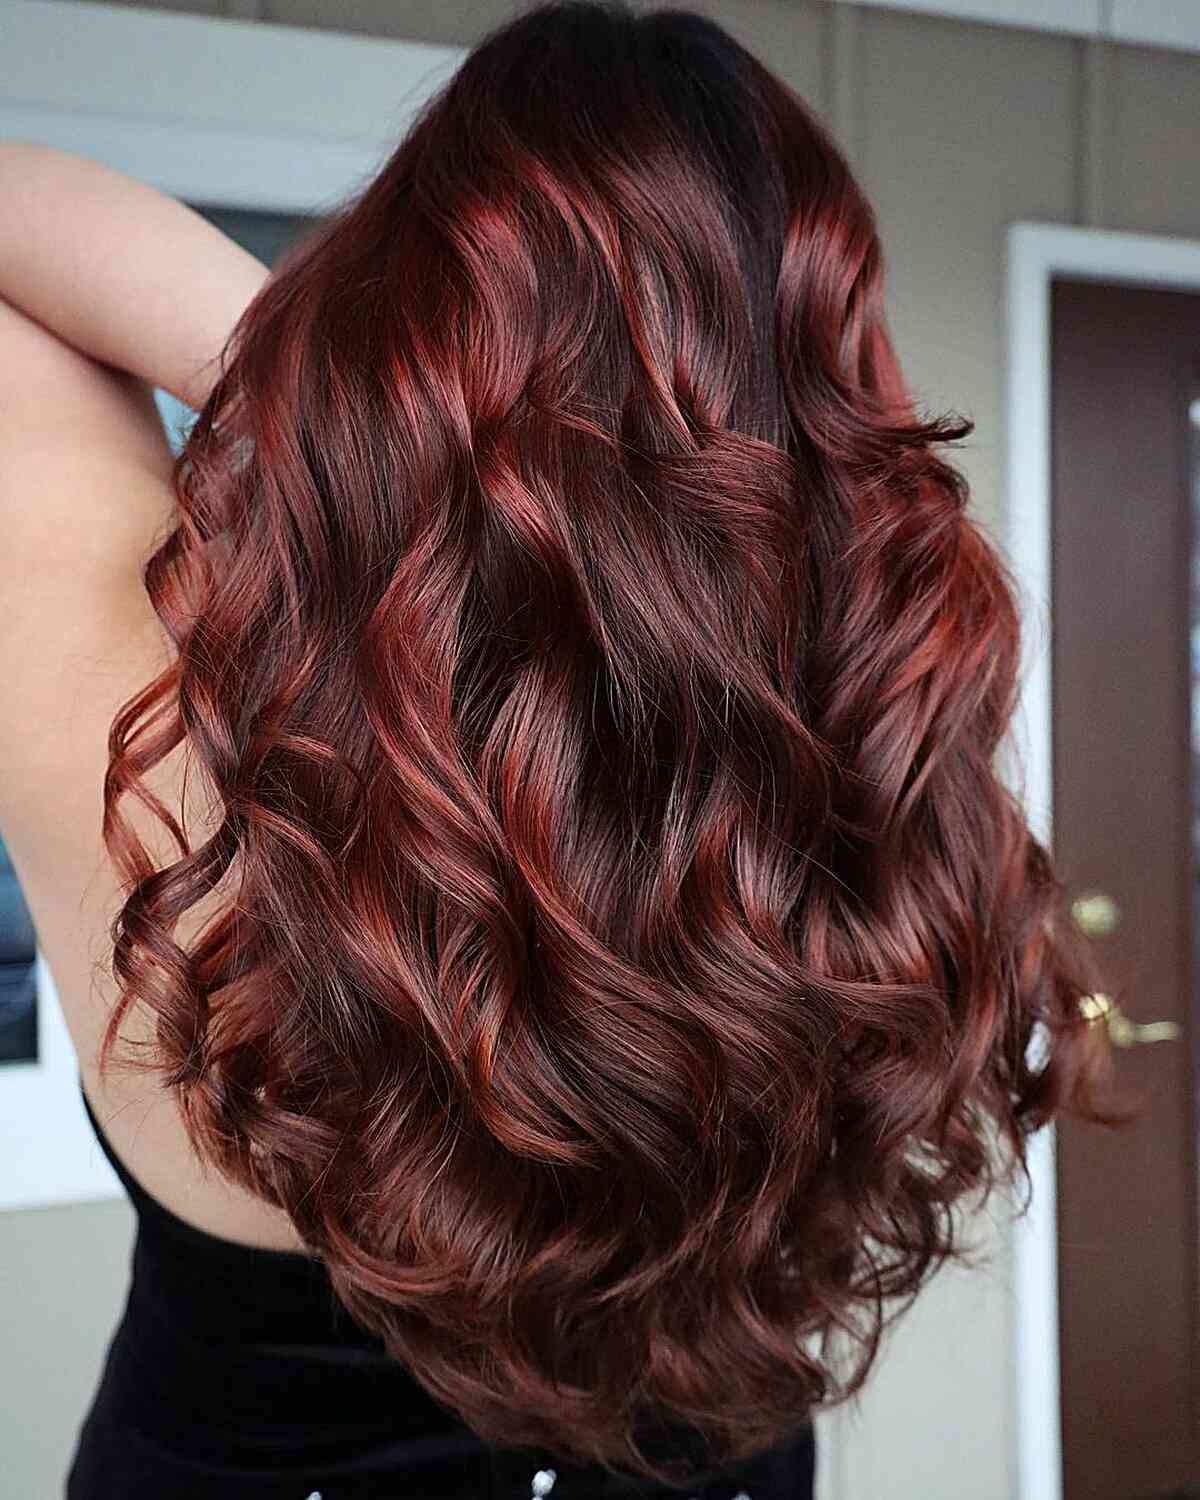 Bold Cherry Red to Copper Colored Hair